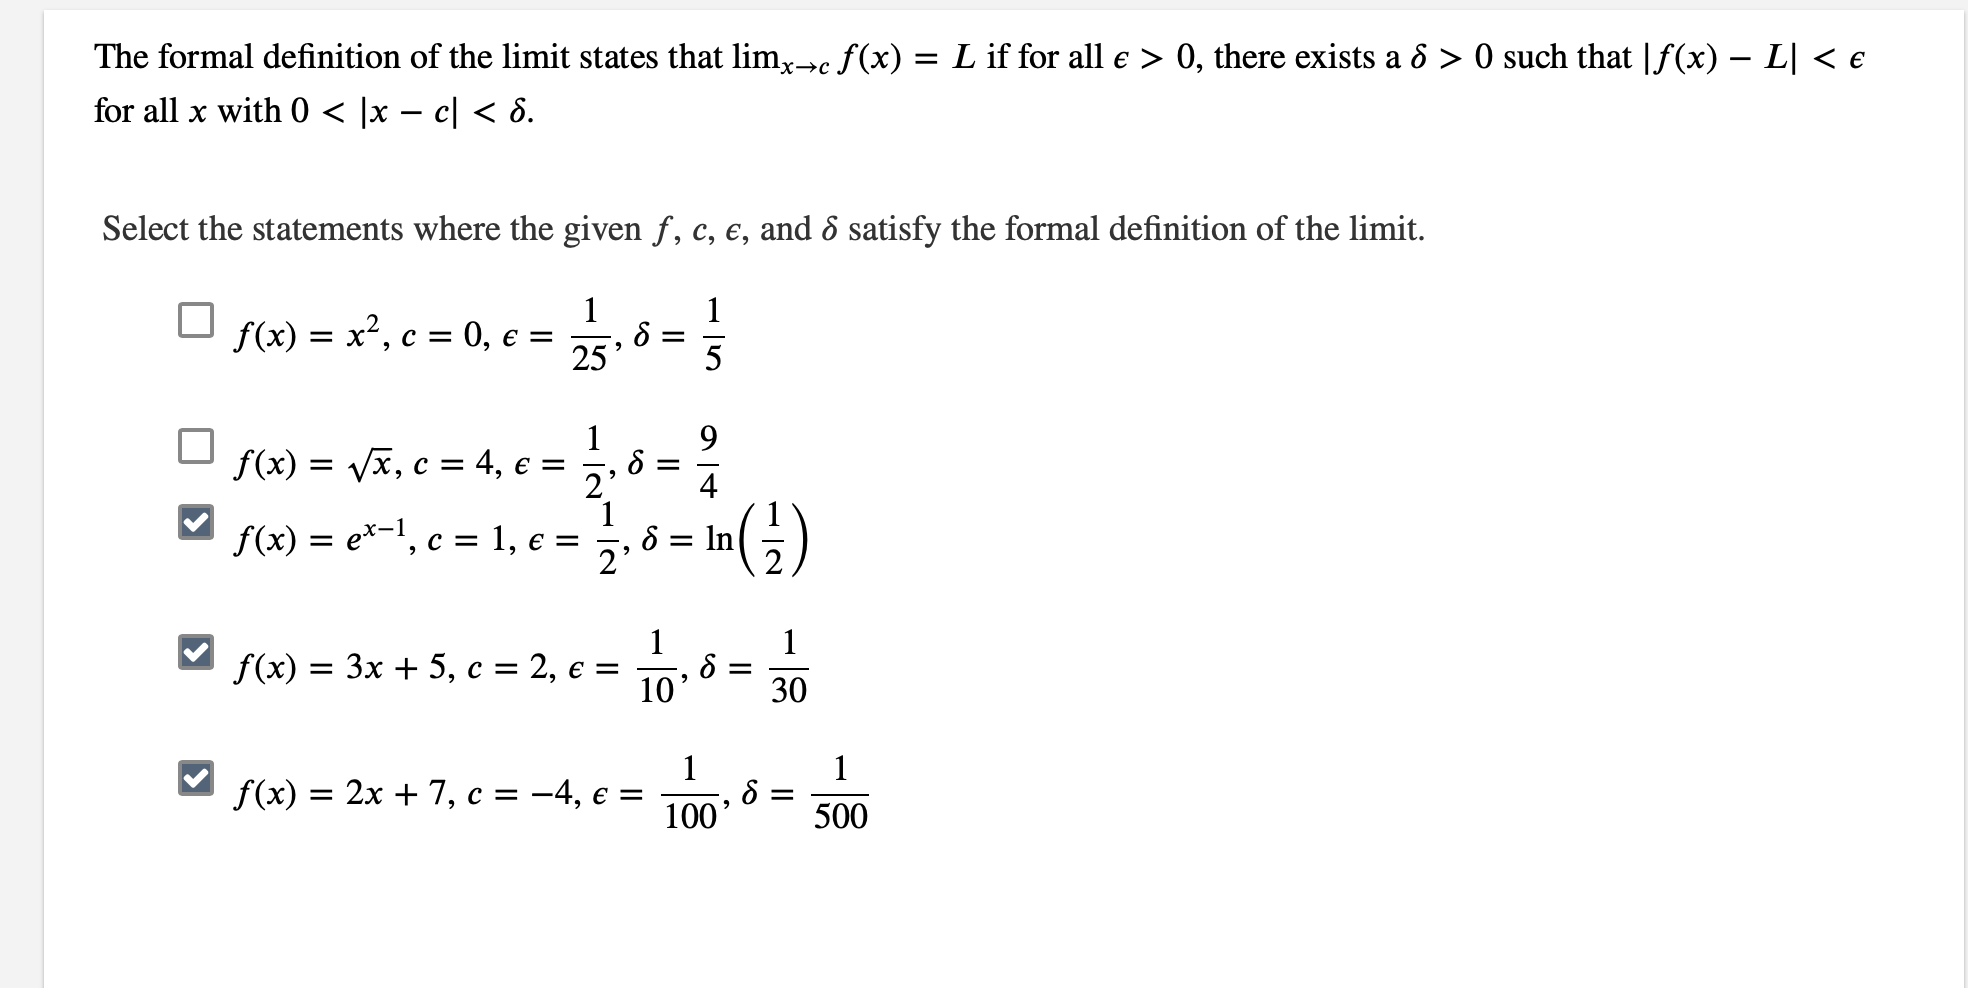 The formal definition of the limit states that limc f(x) = Lif for all e> 0, there exists a ô >0 such that |f(x) - L| < e
for all x with 0 < |x - c| < 6
Select the statements where the given f, c, e, and ô satisfy the formal definition of the limit.
1
1
f(x)x2, c 0,
=
25
5
1
9
4, e =
, c
f(x)
2'
1
1, e =
f(x)e-1, c
ln
2'
1
f(x) 3x 5, c
2, e =
10'
=
30
1
1
f(x) 3 2х + 7, с %3D — 4, є %3
100
500
